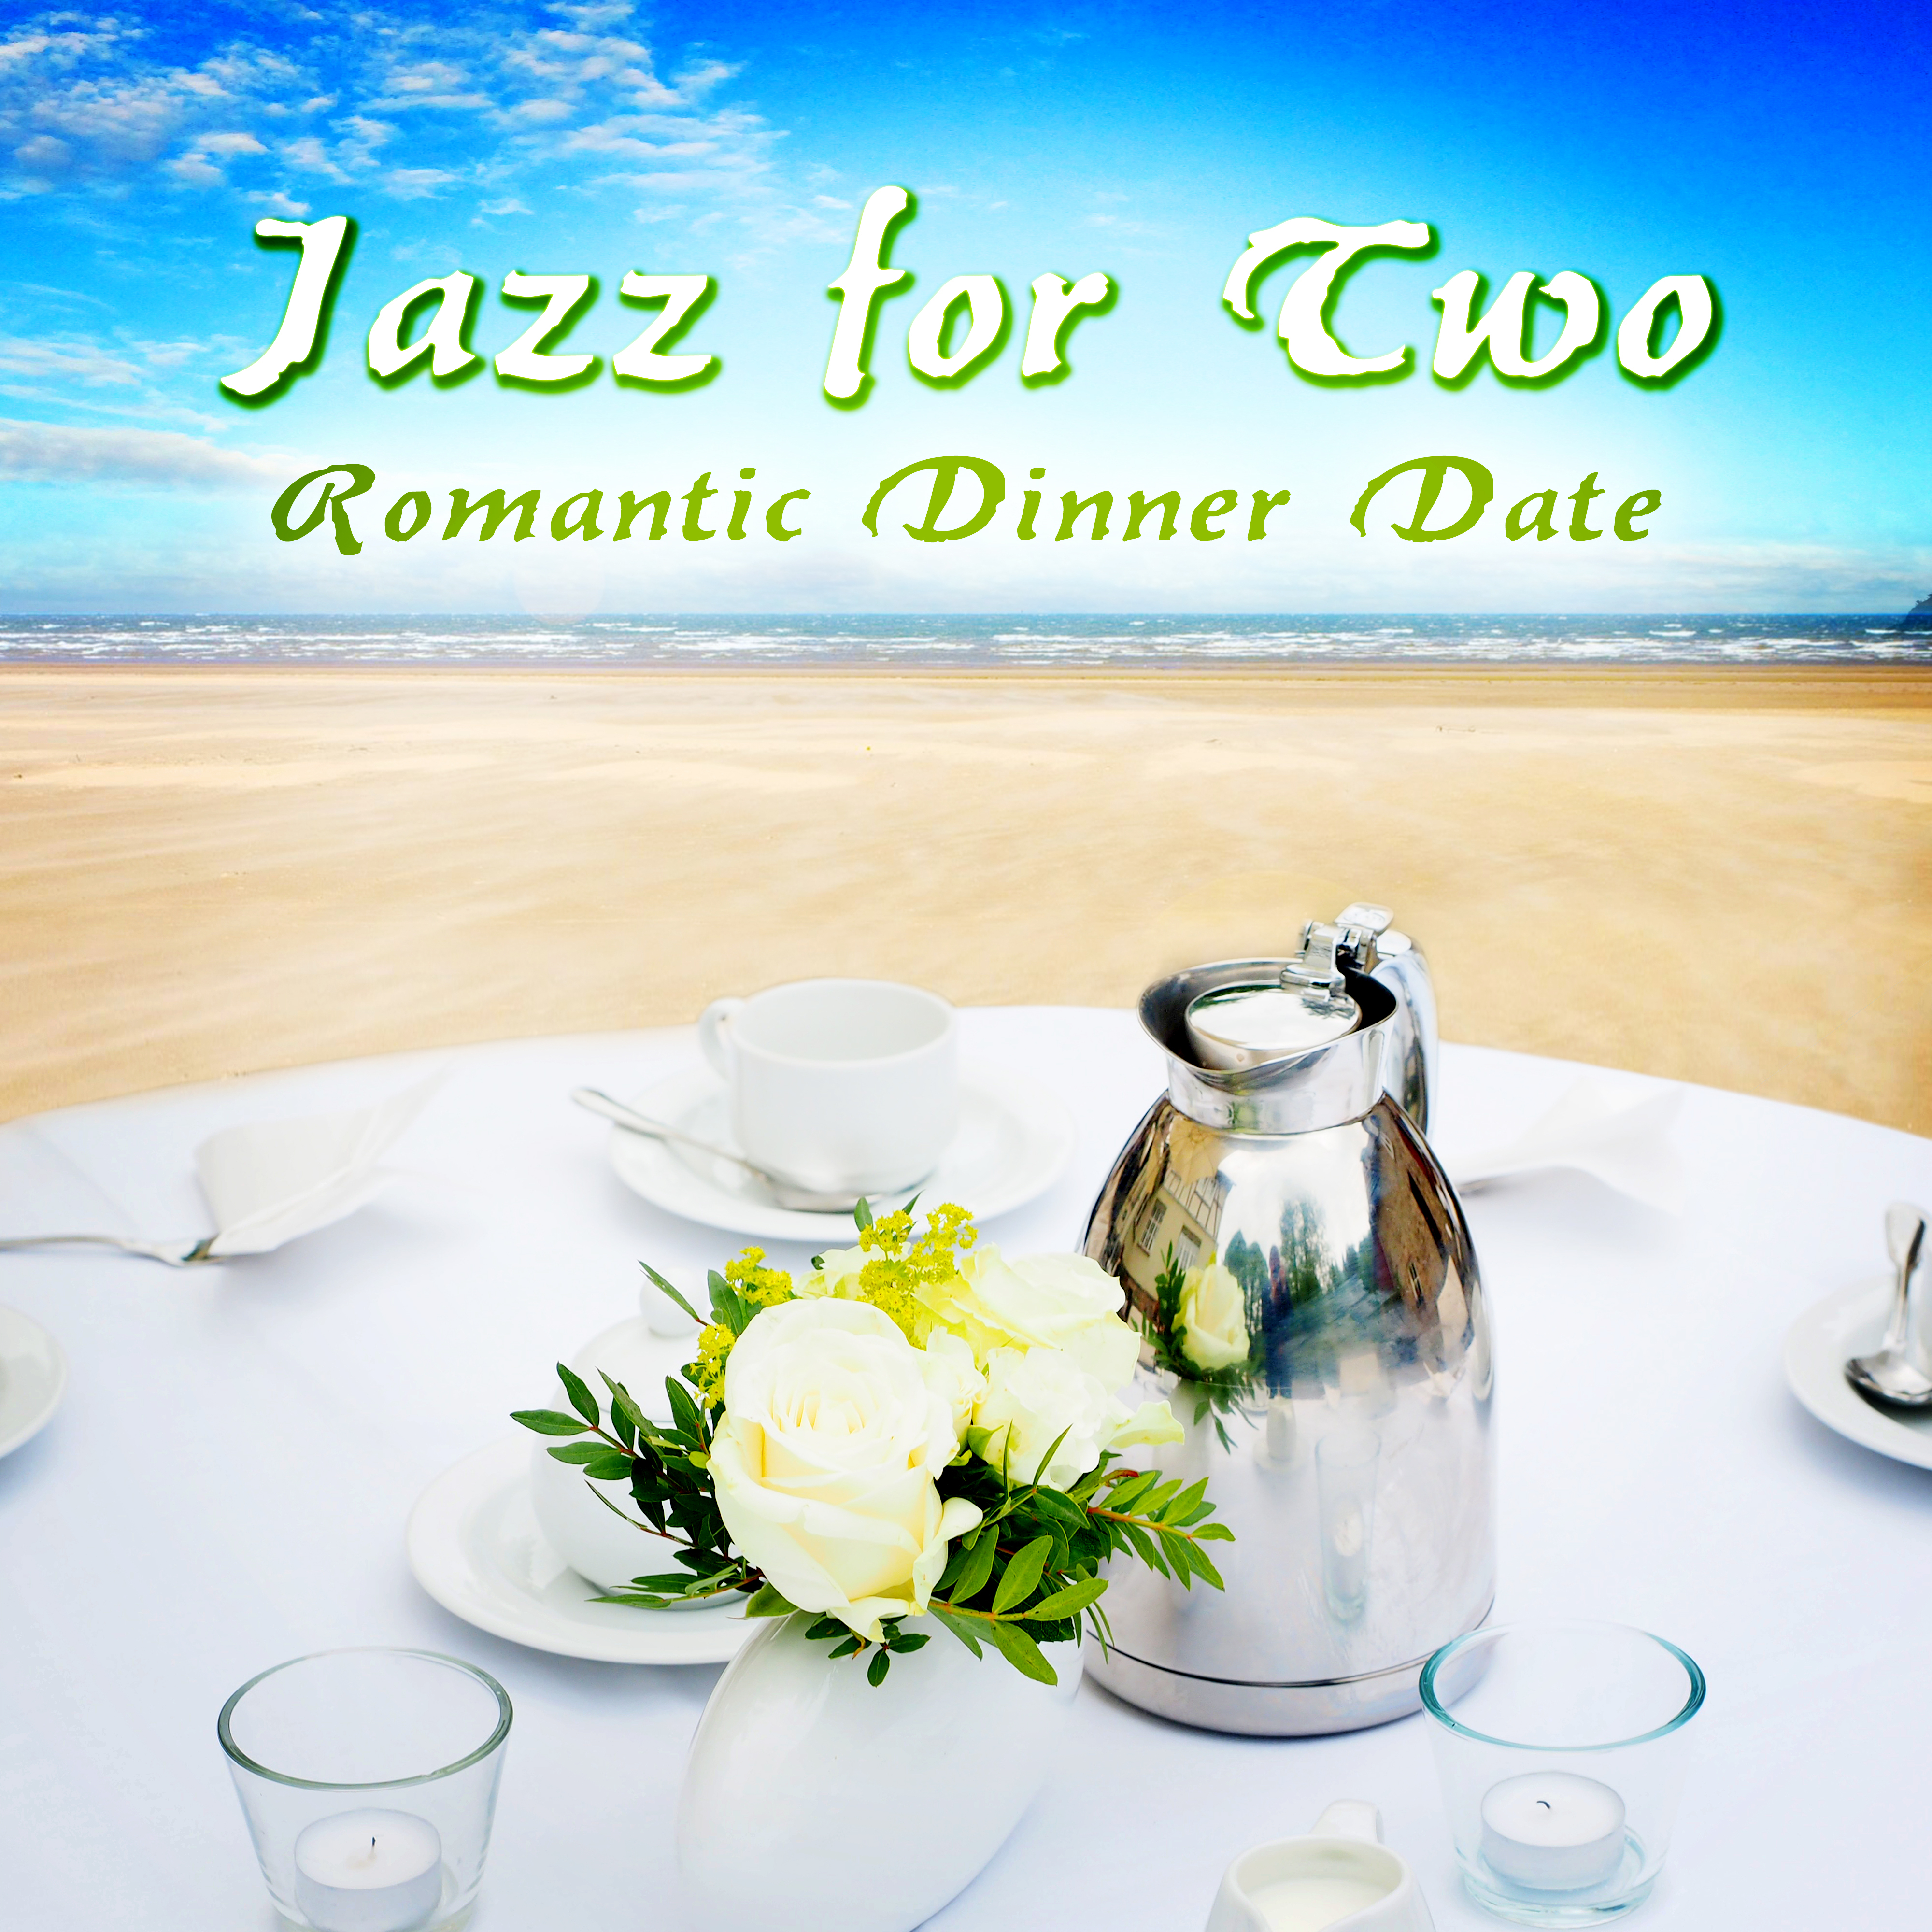 Jazz for Two – Romantic Dinner Date, Jazzy Dinner for Loving Couples, Song for Lovers, Piano Music to Relax, Engagement Background Music